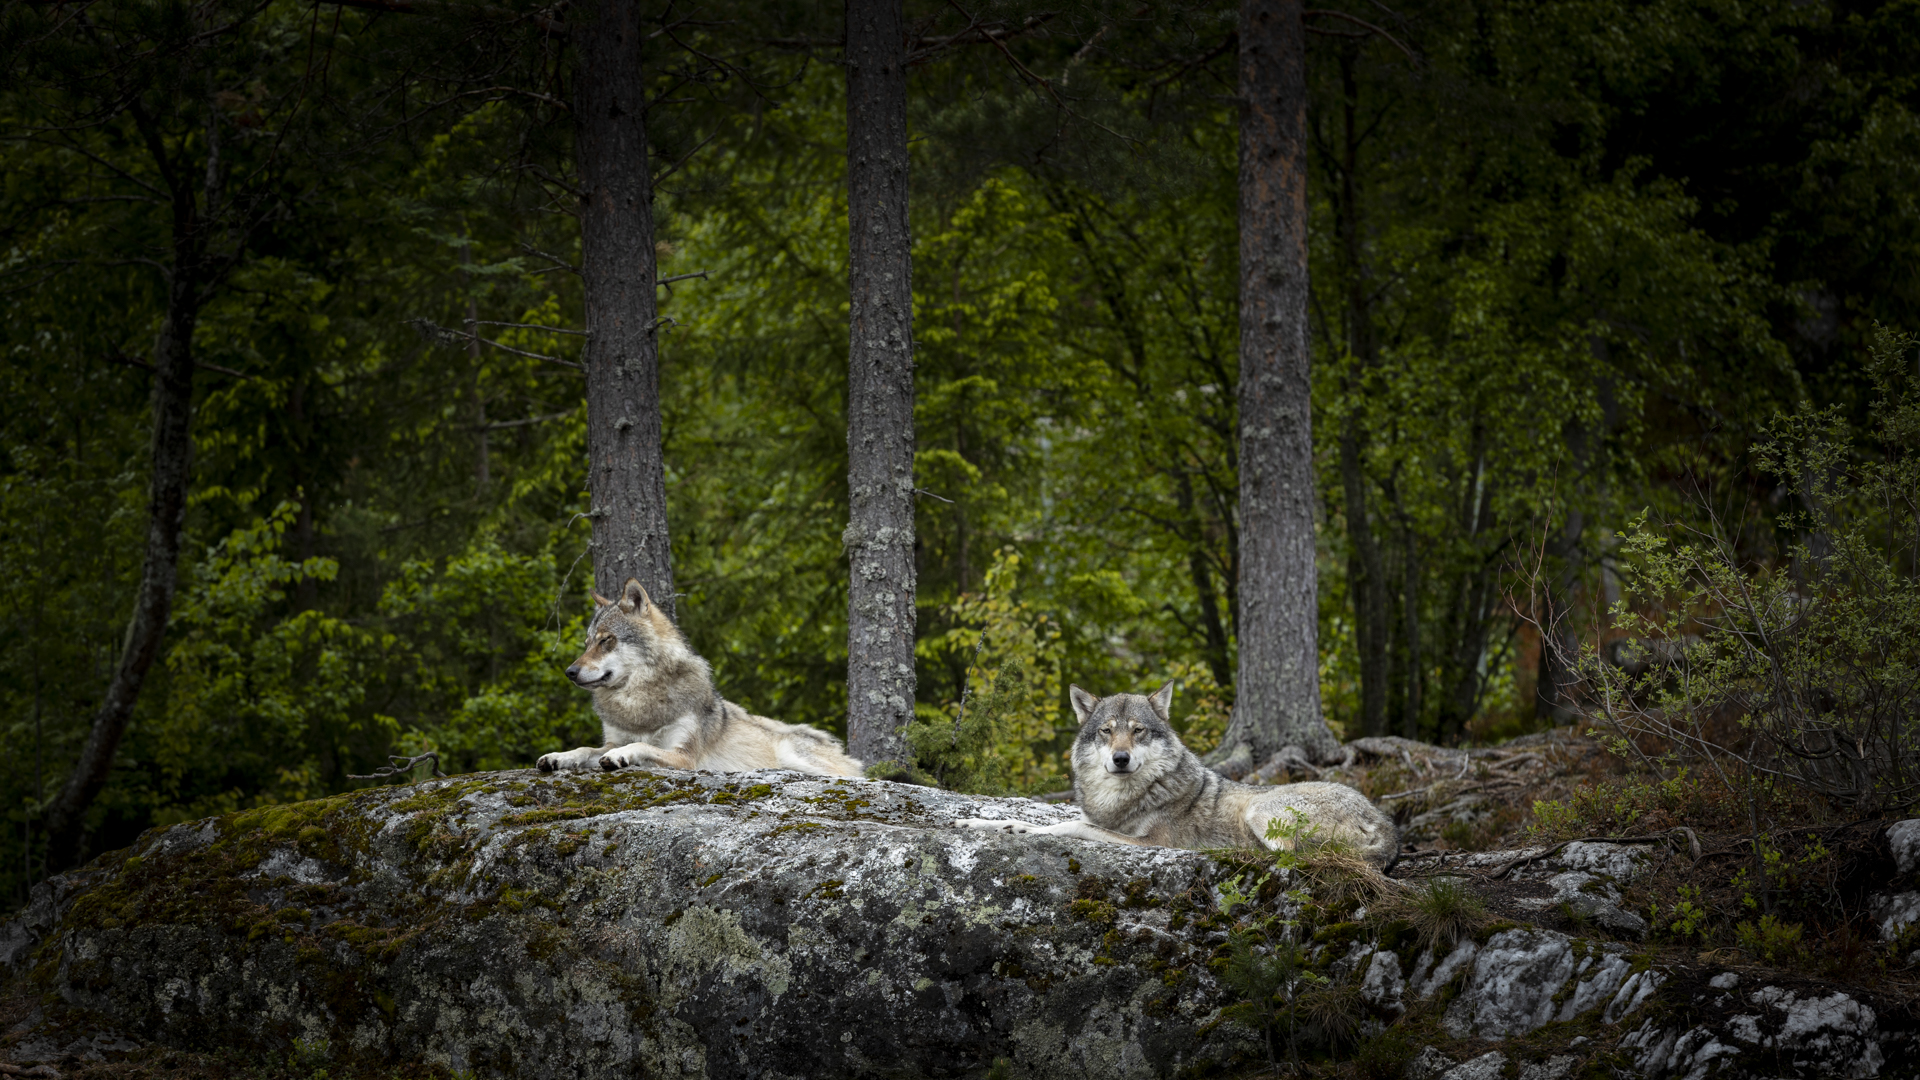 The wolf pair (Tore Gravelsæter)